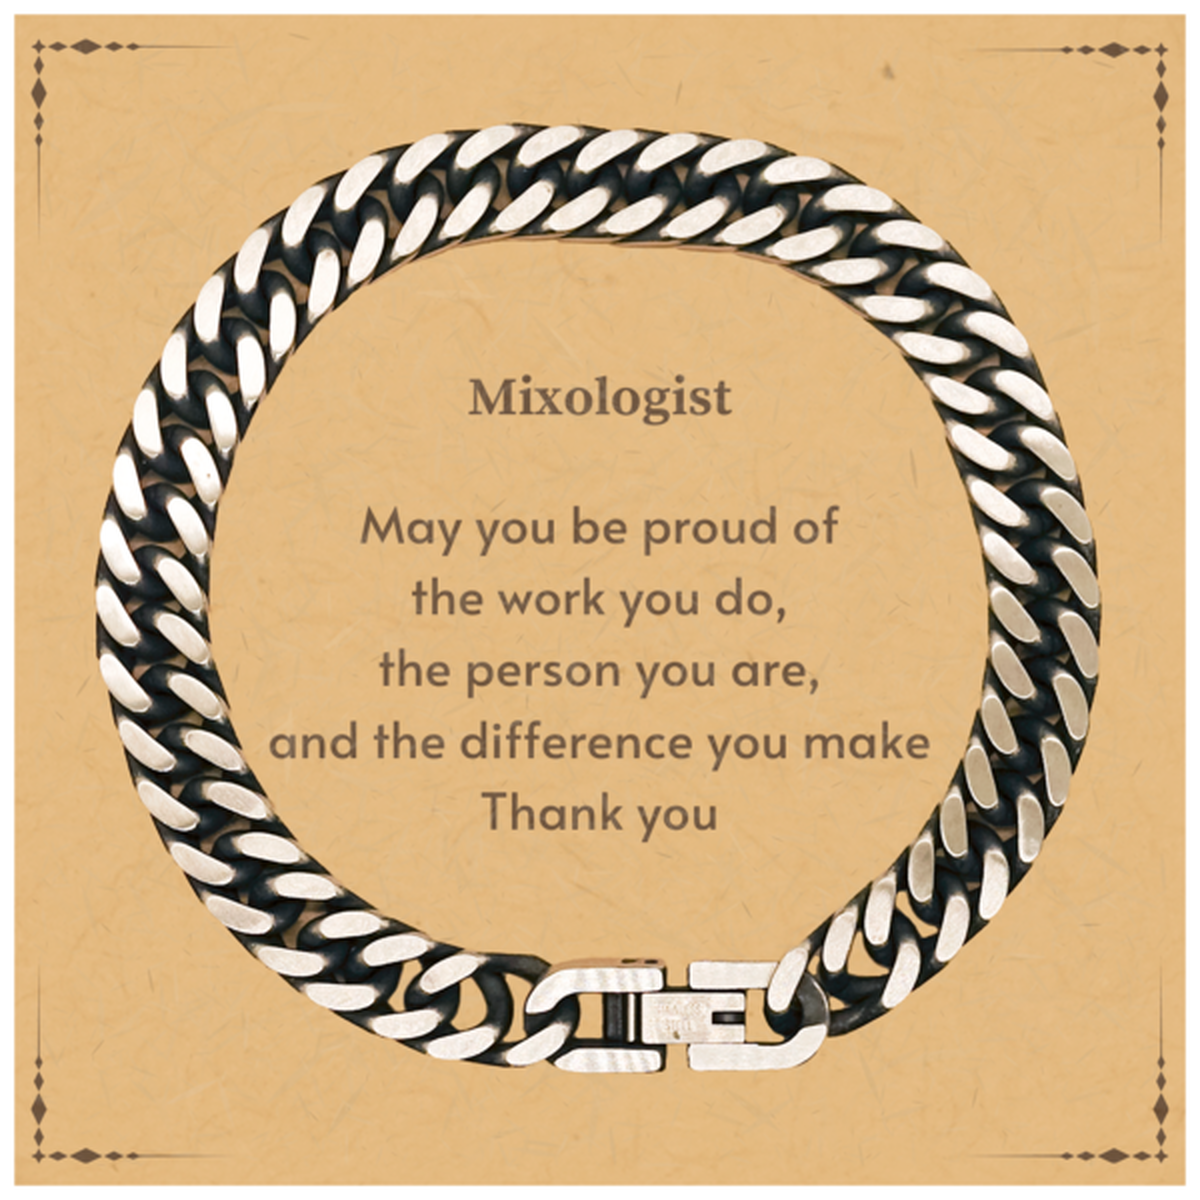 Heartwarming Cuban Link Chain Bracelet Retirement Coworkers Gifts for Mixologist, Mixologist May You be proud of the work you do, the person you are Gifts for Boss Men Women Friends